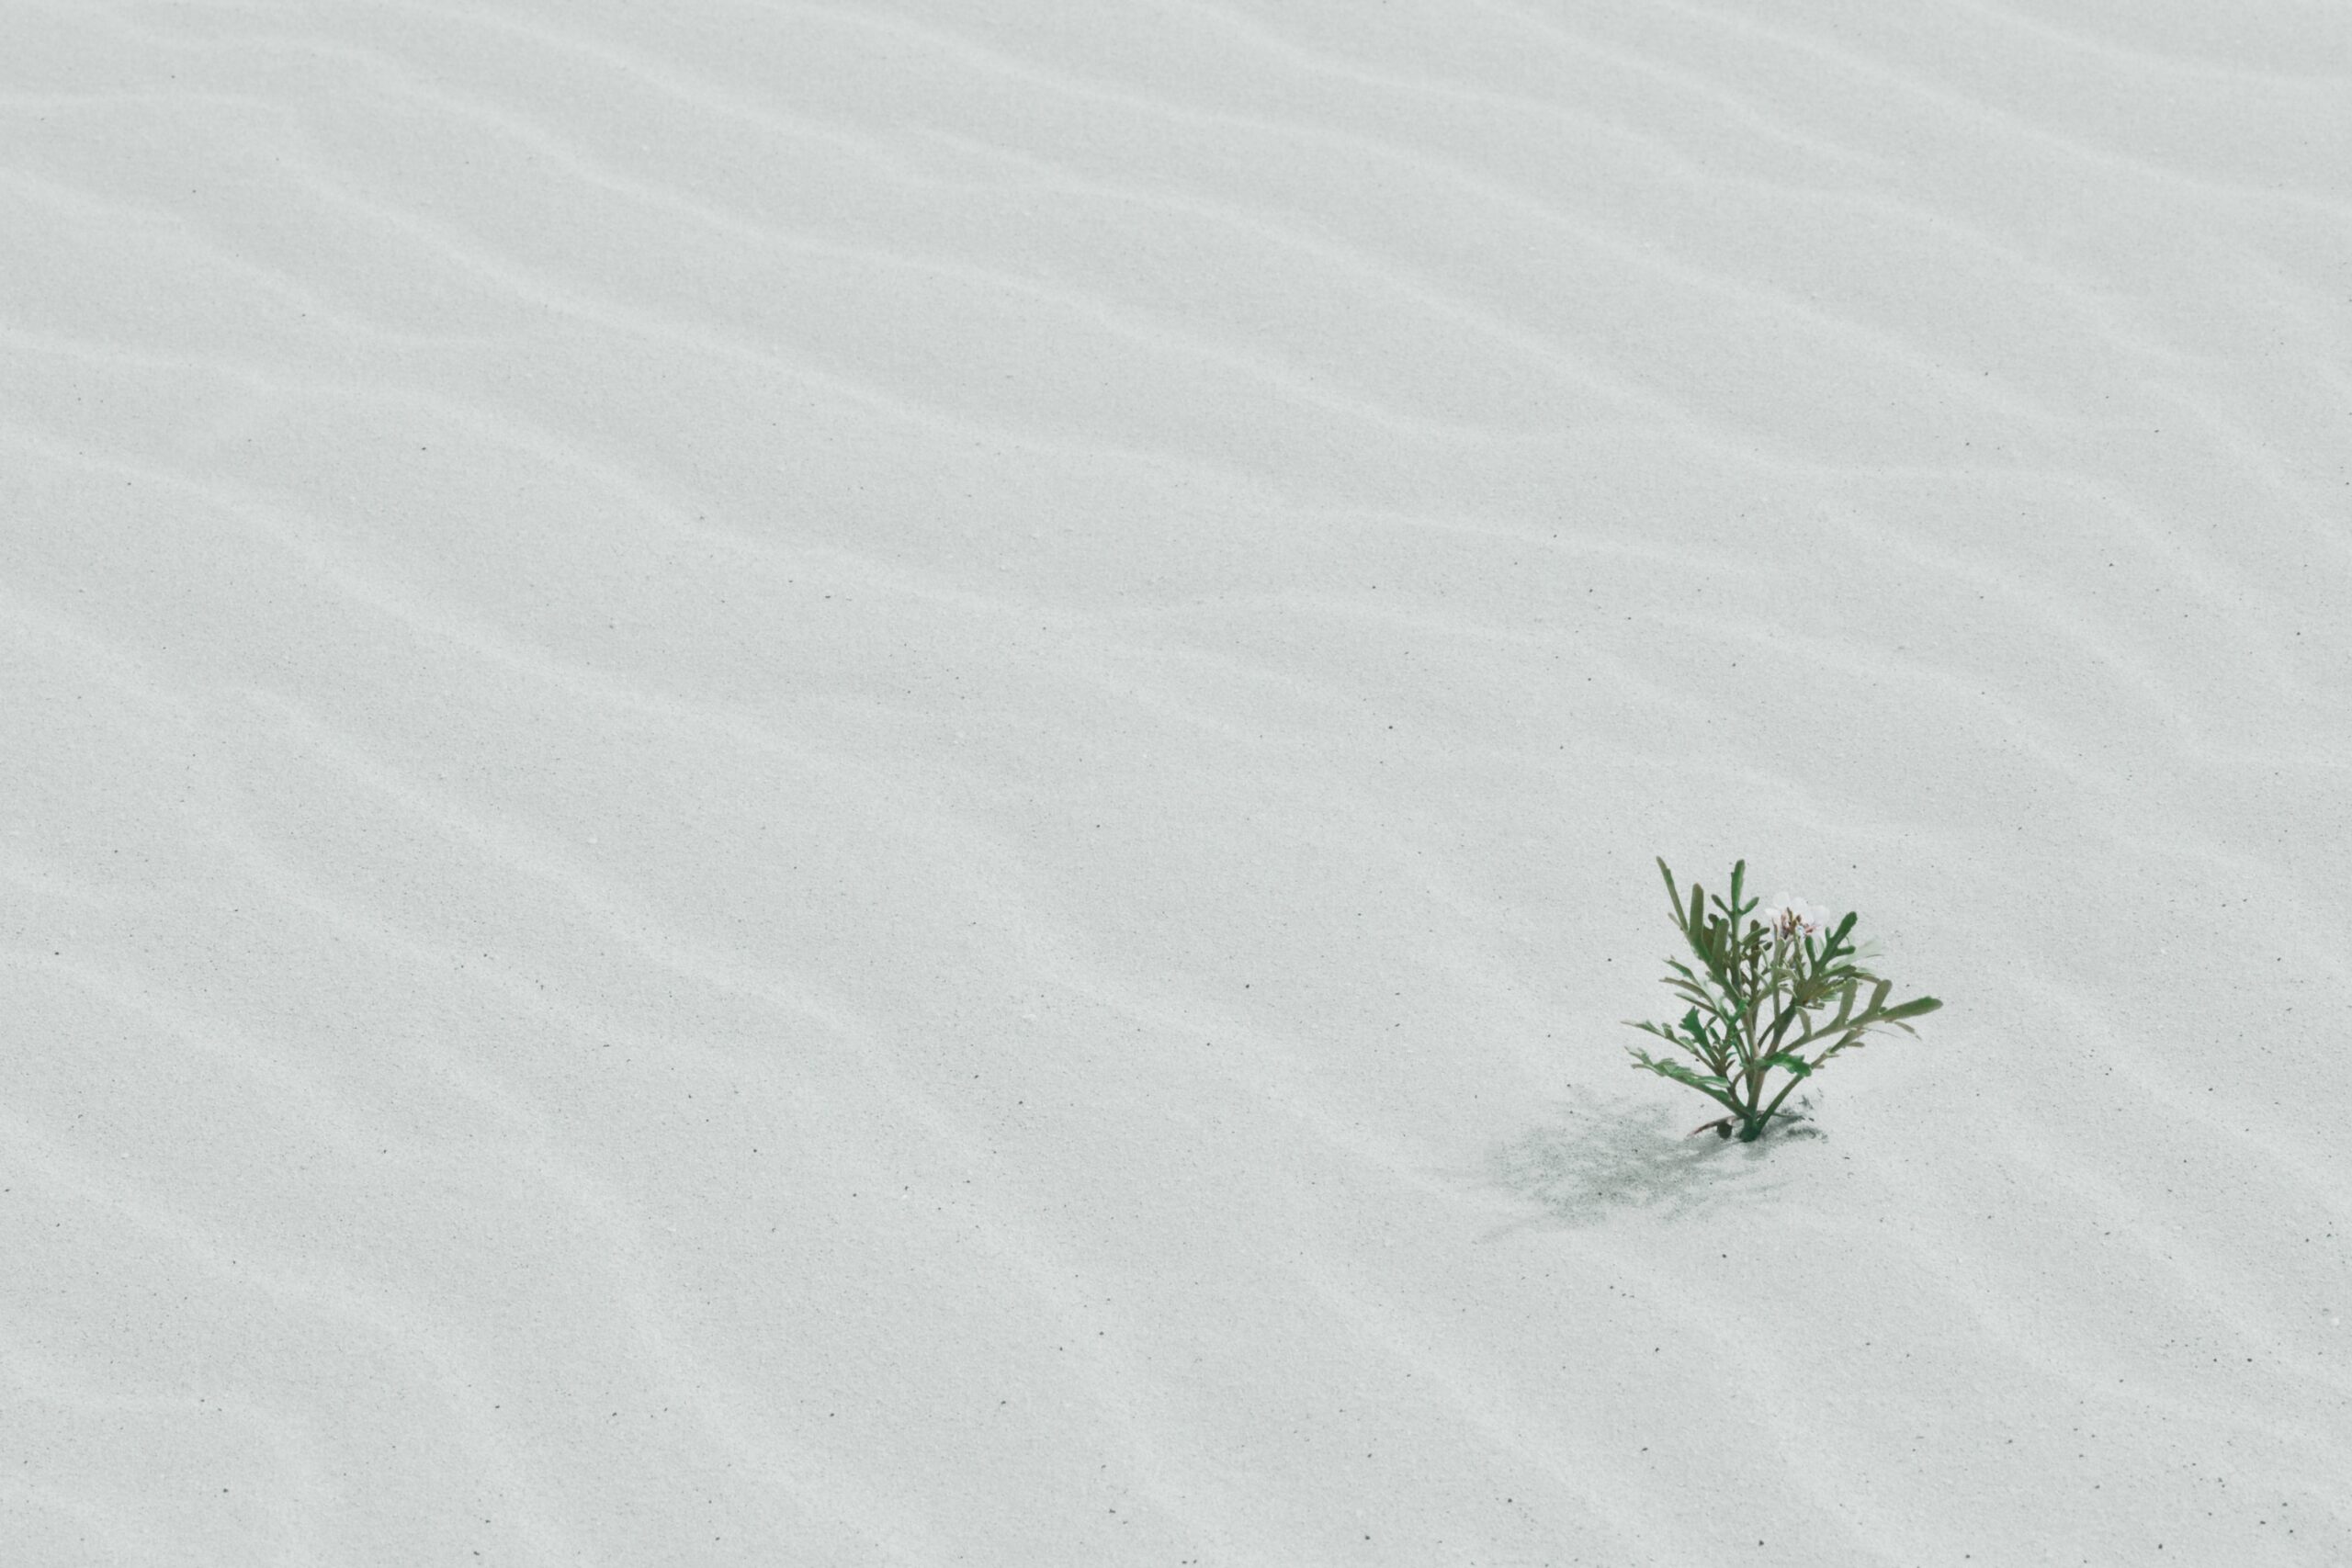 A plant grows in the sand